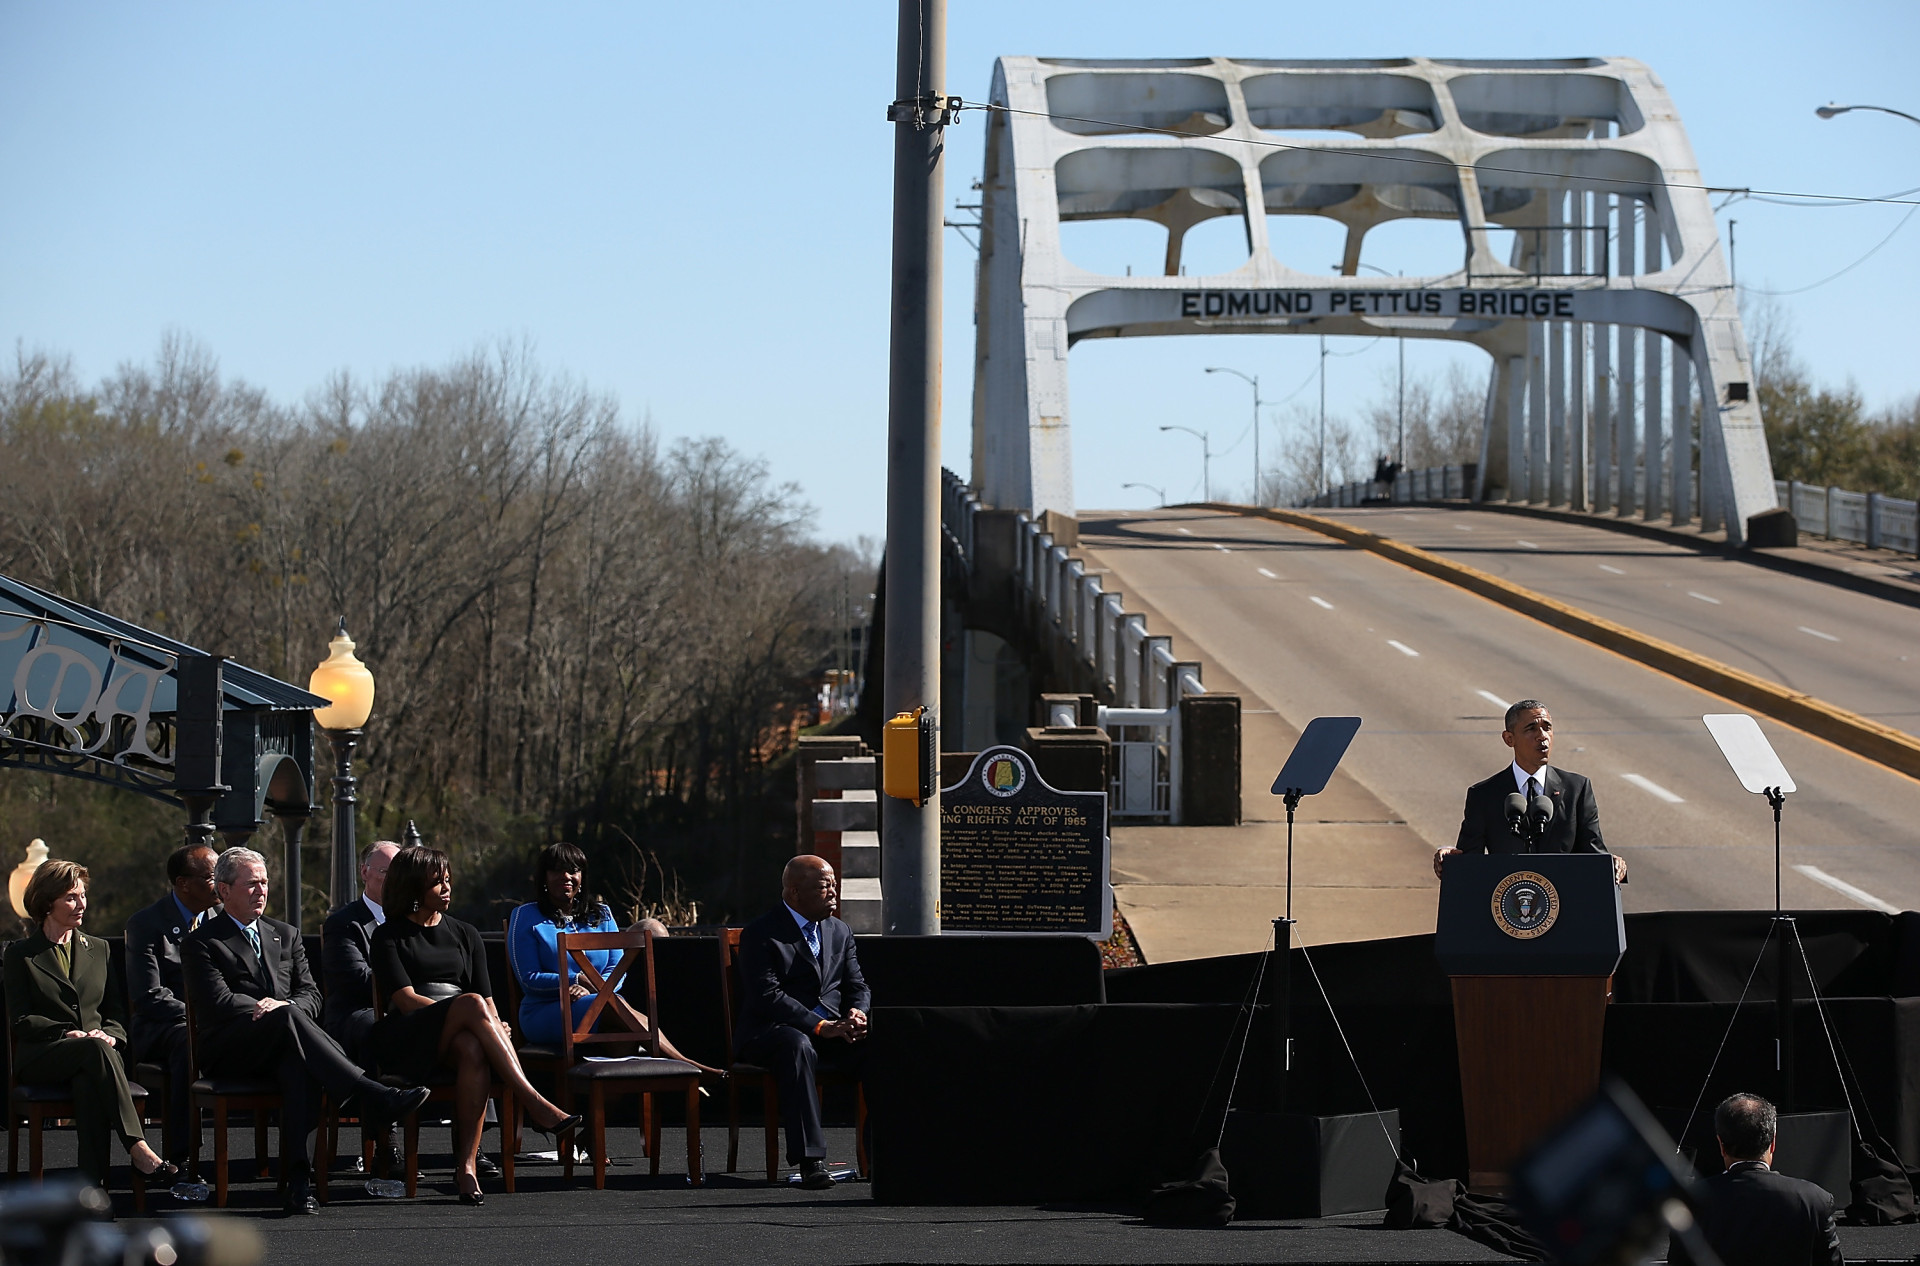 President Barack Obama speaks in front of the Edmund Pettus Bridge in Selma, the scene of a violent confrontation between marchers and police and state troopers.<p>You may also like:<a href="https://www.starsinsider.com/n/426152?utm_source=msn.com&utm_medium=display&utm_campaign=referral_description&utm_content=347864v15en-us"> Images of the world you'd never have seen before the coronavirus outbreak</a></p>